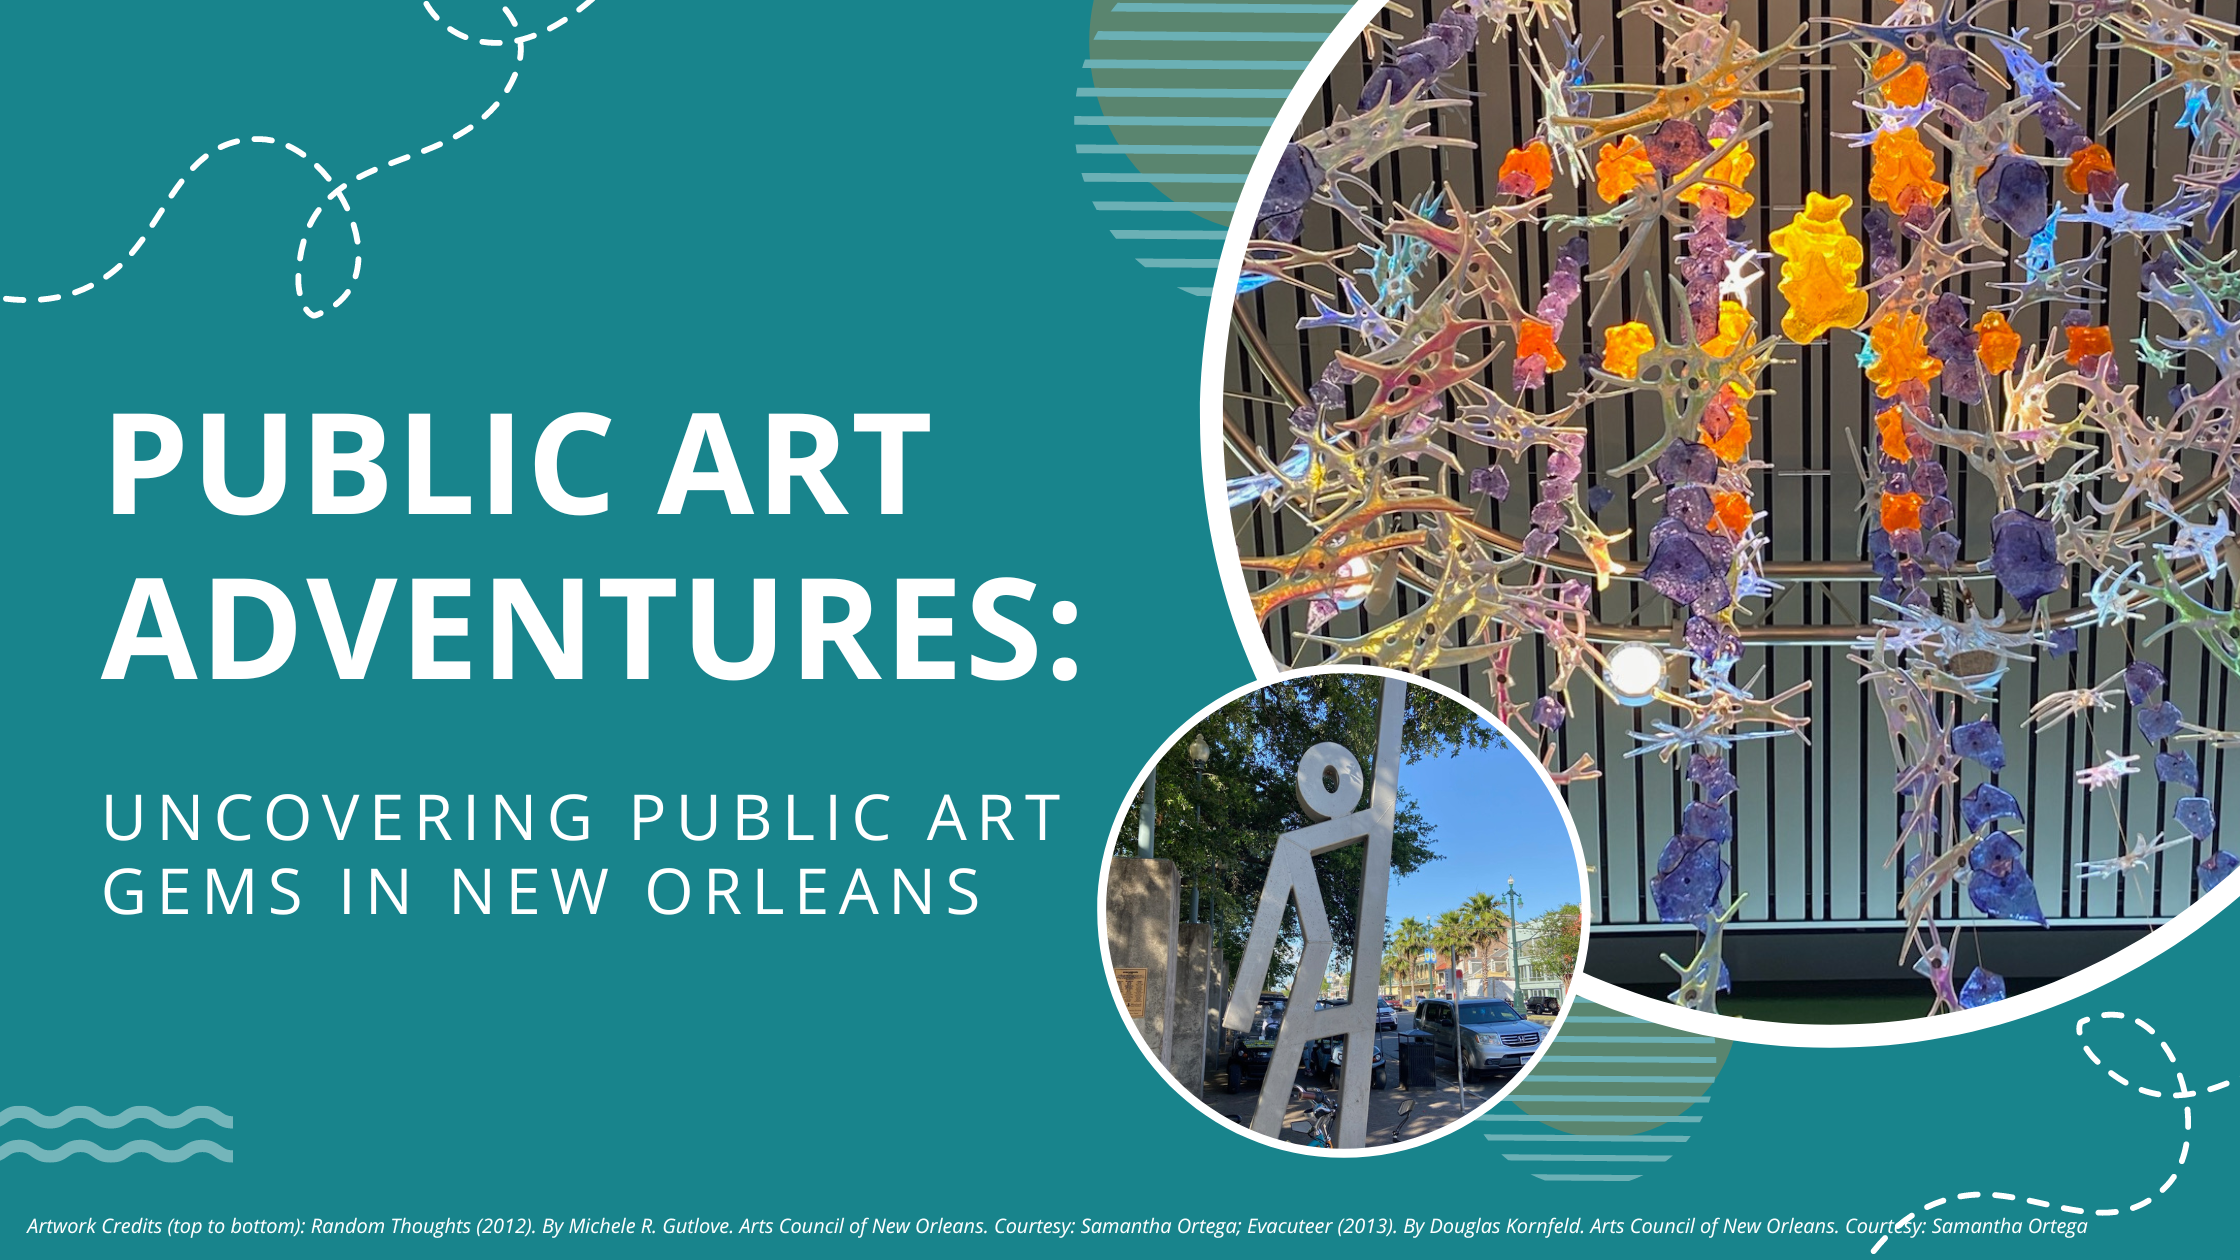 Two pictures of public art sculptures to the right placed on a dark blue/green background. To the left, Public Art Adventures: Uncovering Public Art Gems in New Orleans.